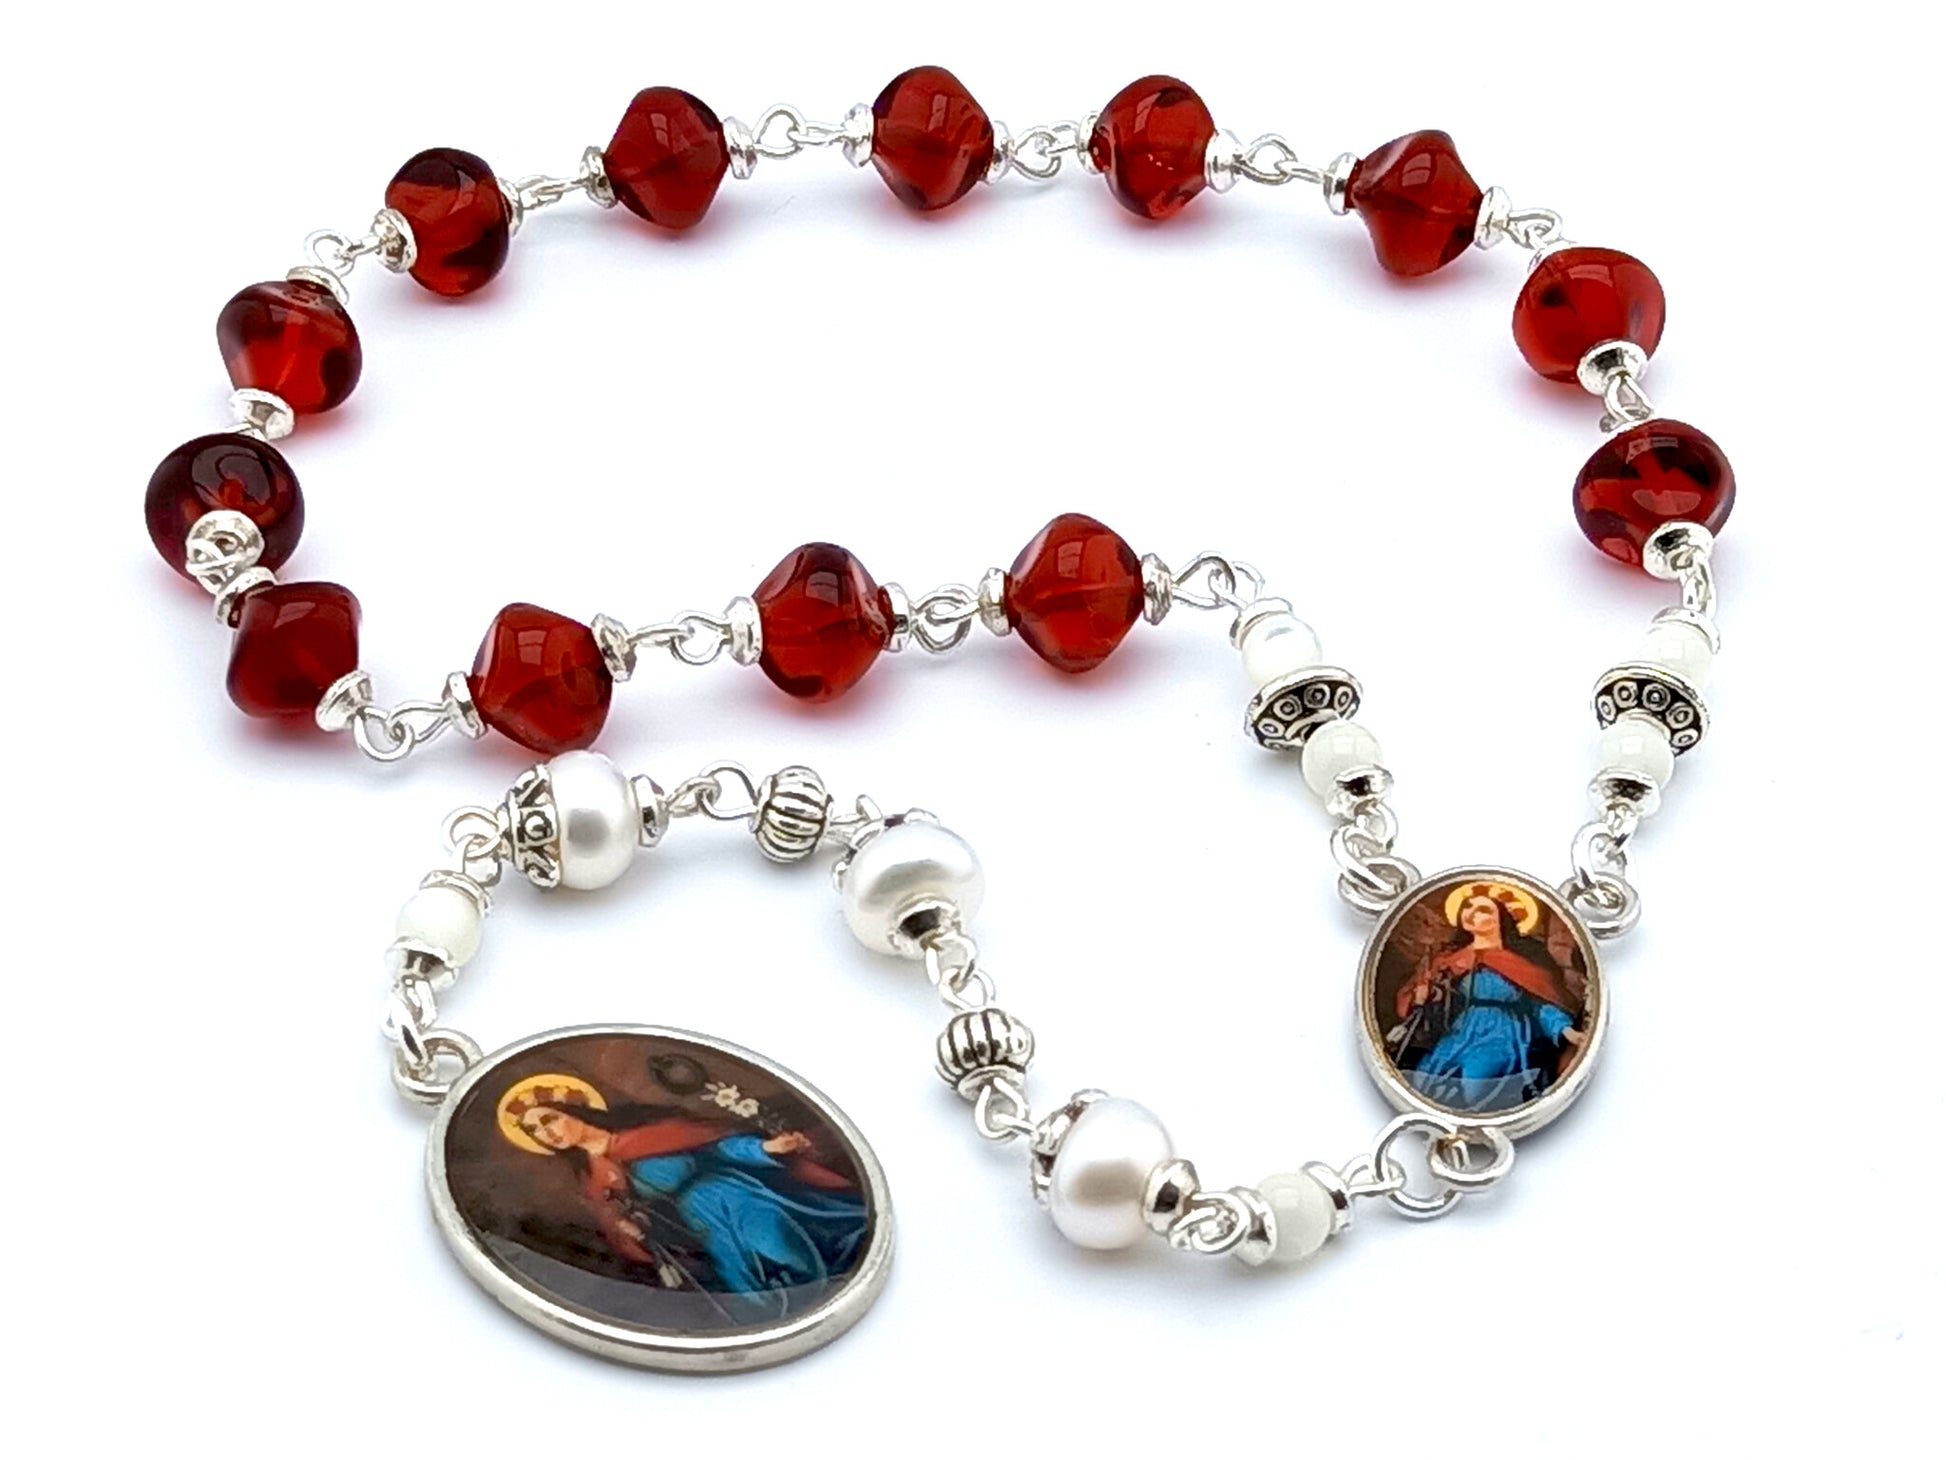 Saint Philomena unique rosary beads prayer chaplet with red nugget glass and pearl beads and double sided picture medals.